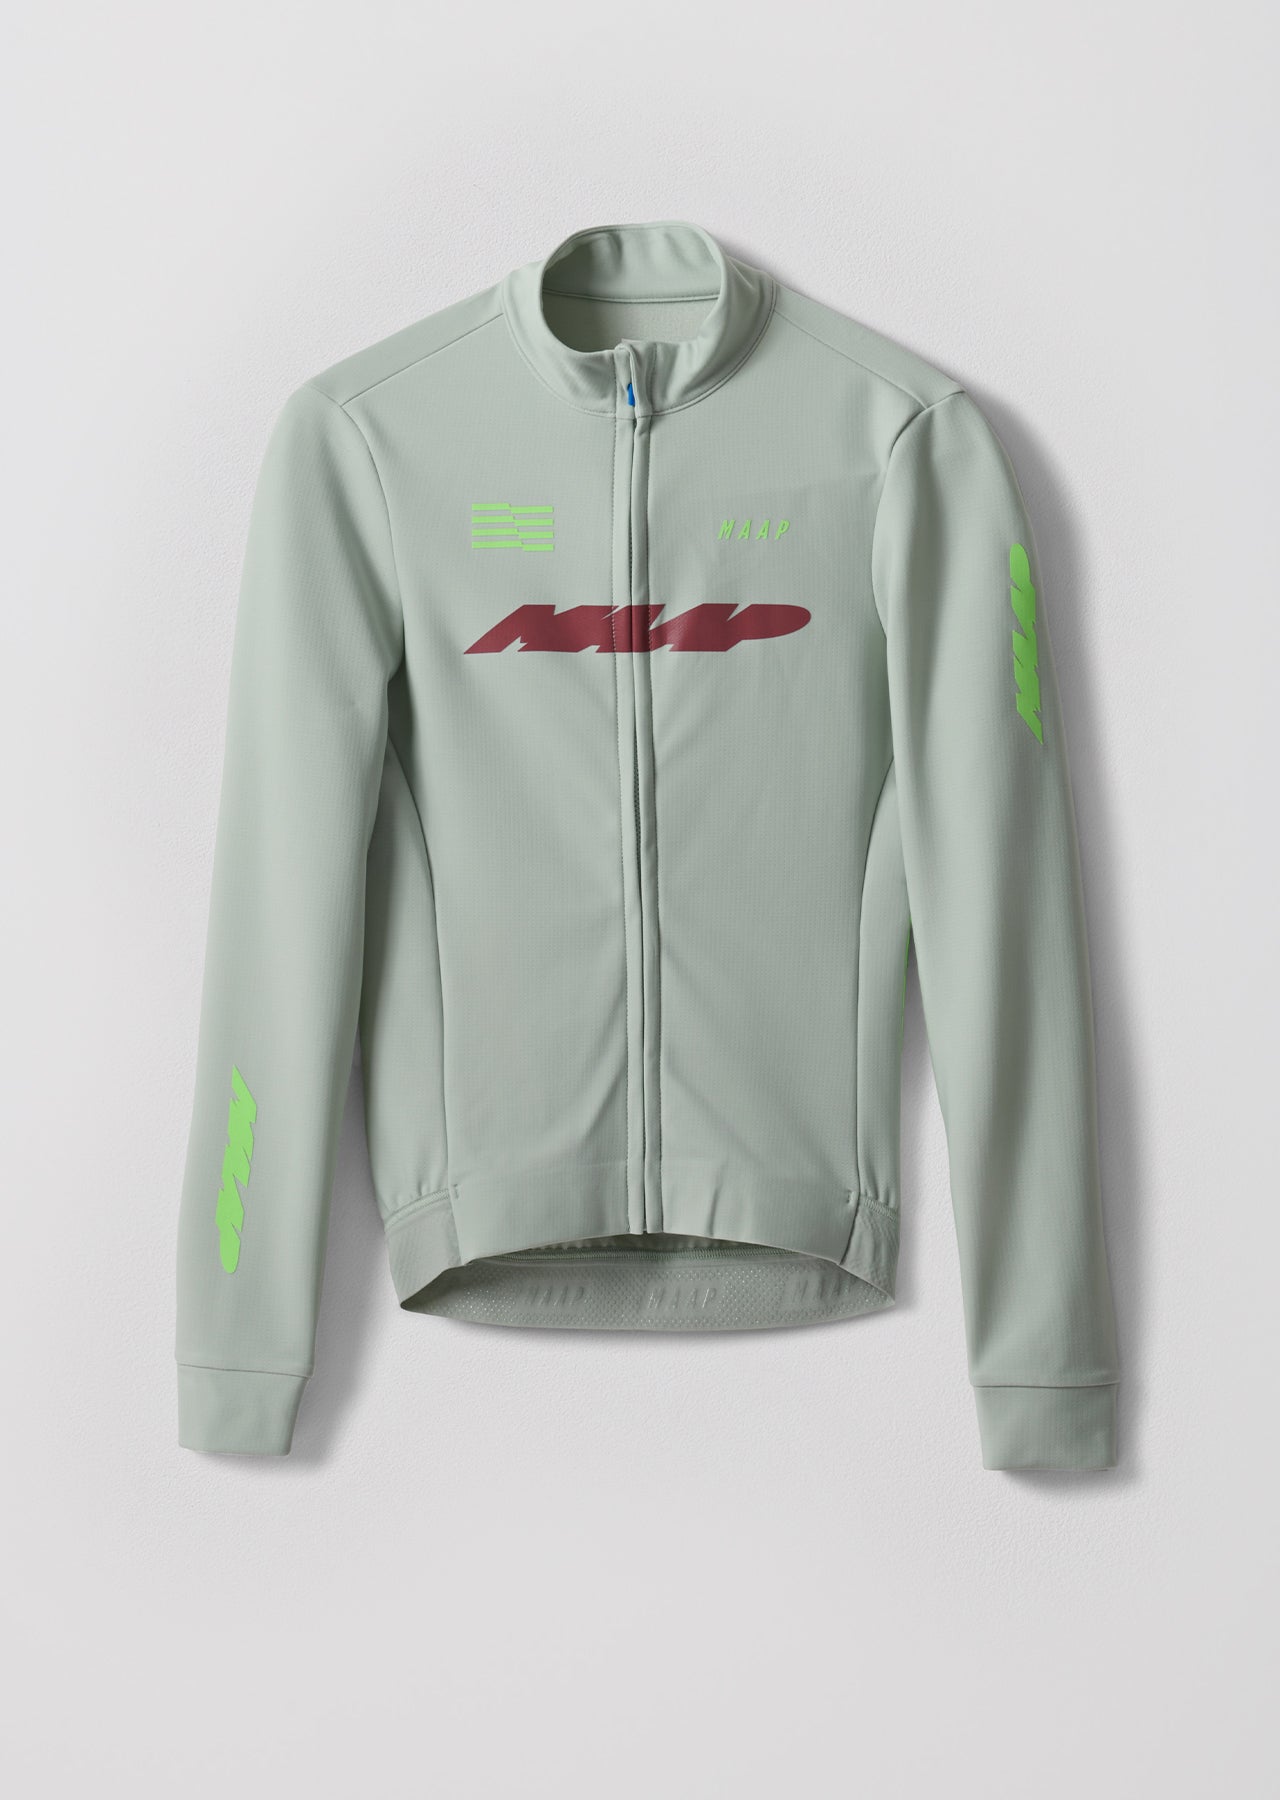 Women's Eclipse Thermal LS Jersey 2.0